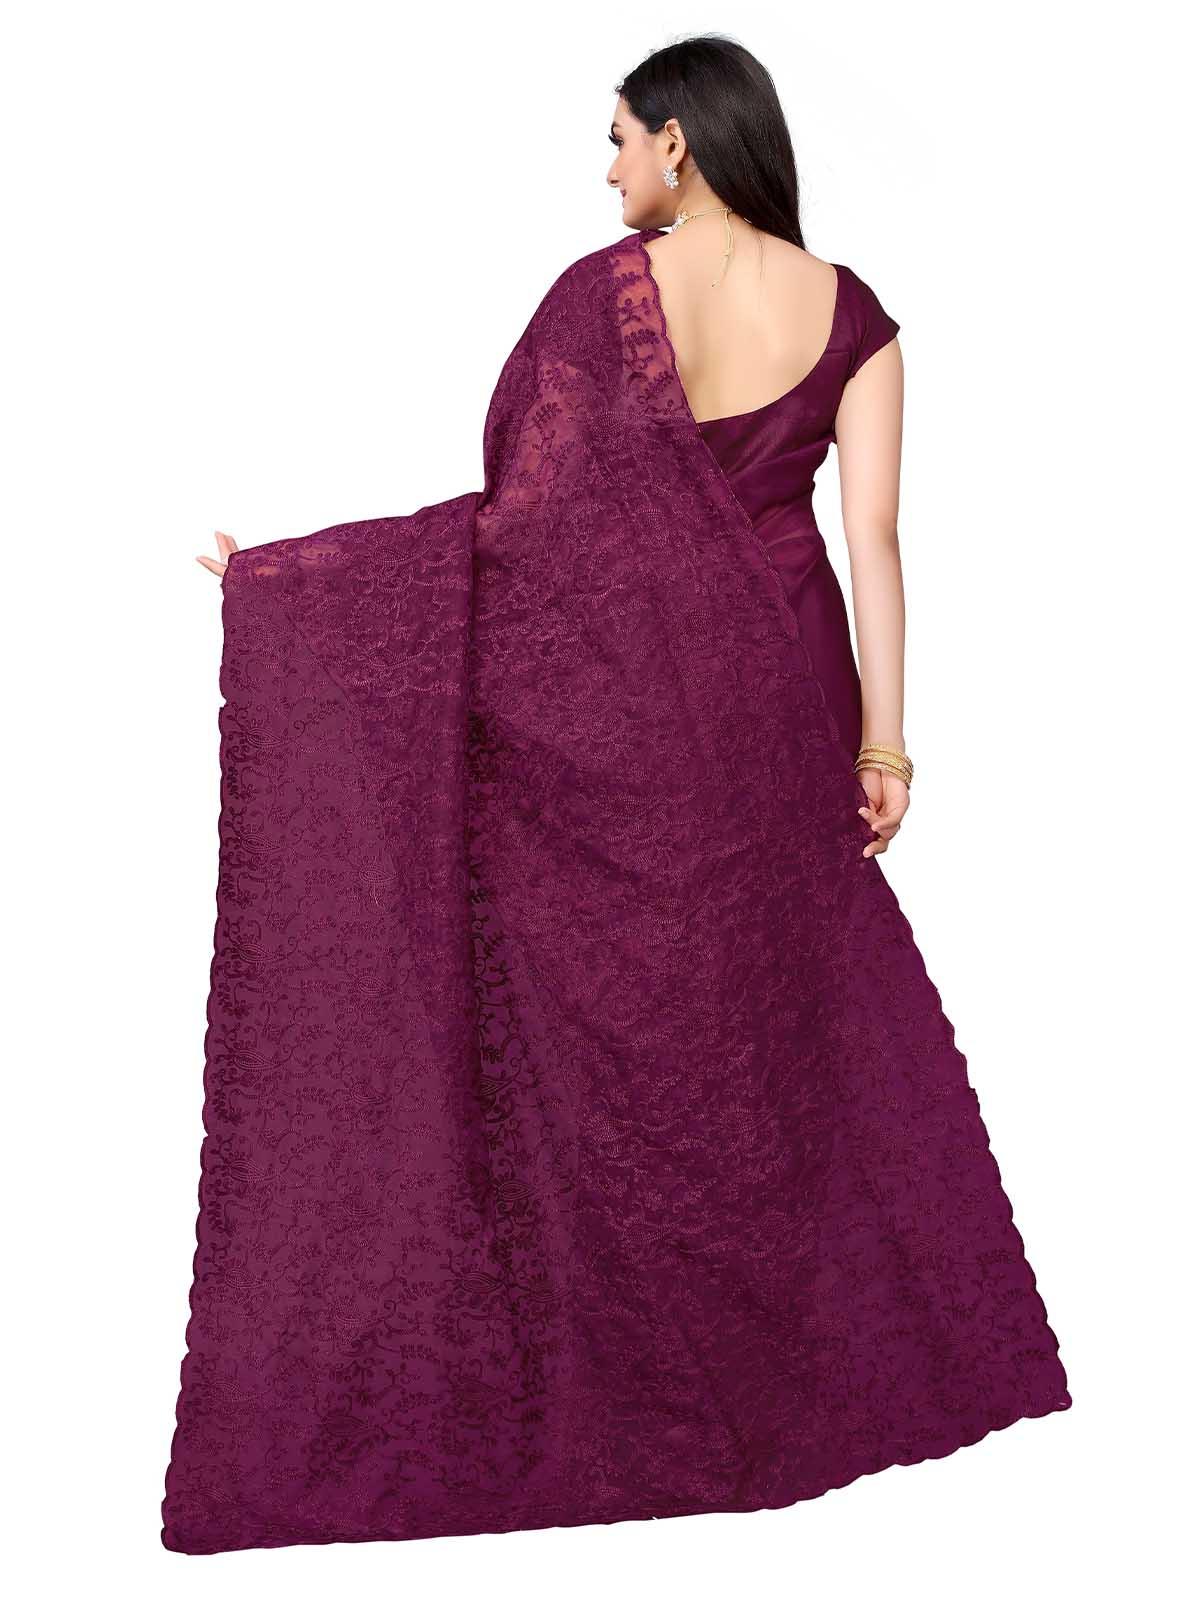 Women's Violet Organza Embroidered Saree With Blouse - Odette